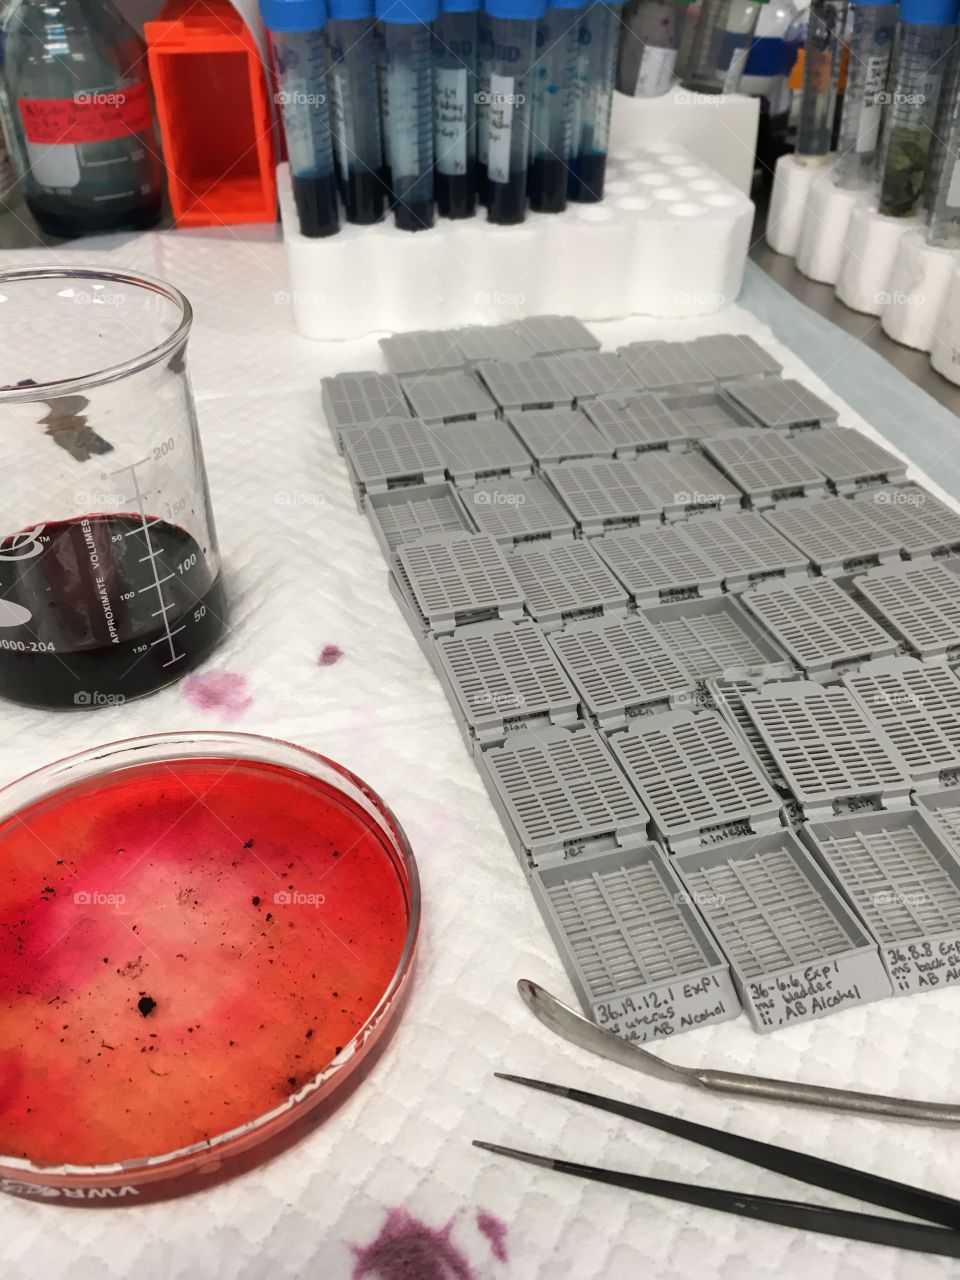 Special stain experiment in a science lab using a red stain with pathology cassettes and racks of labeled tubes